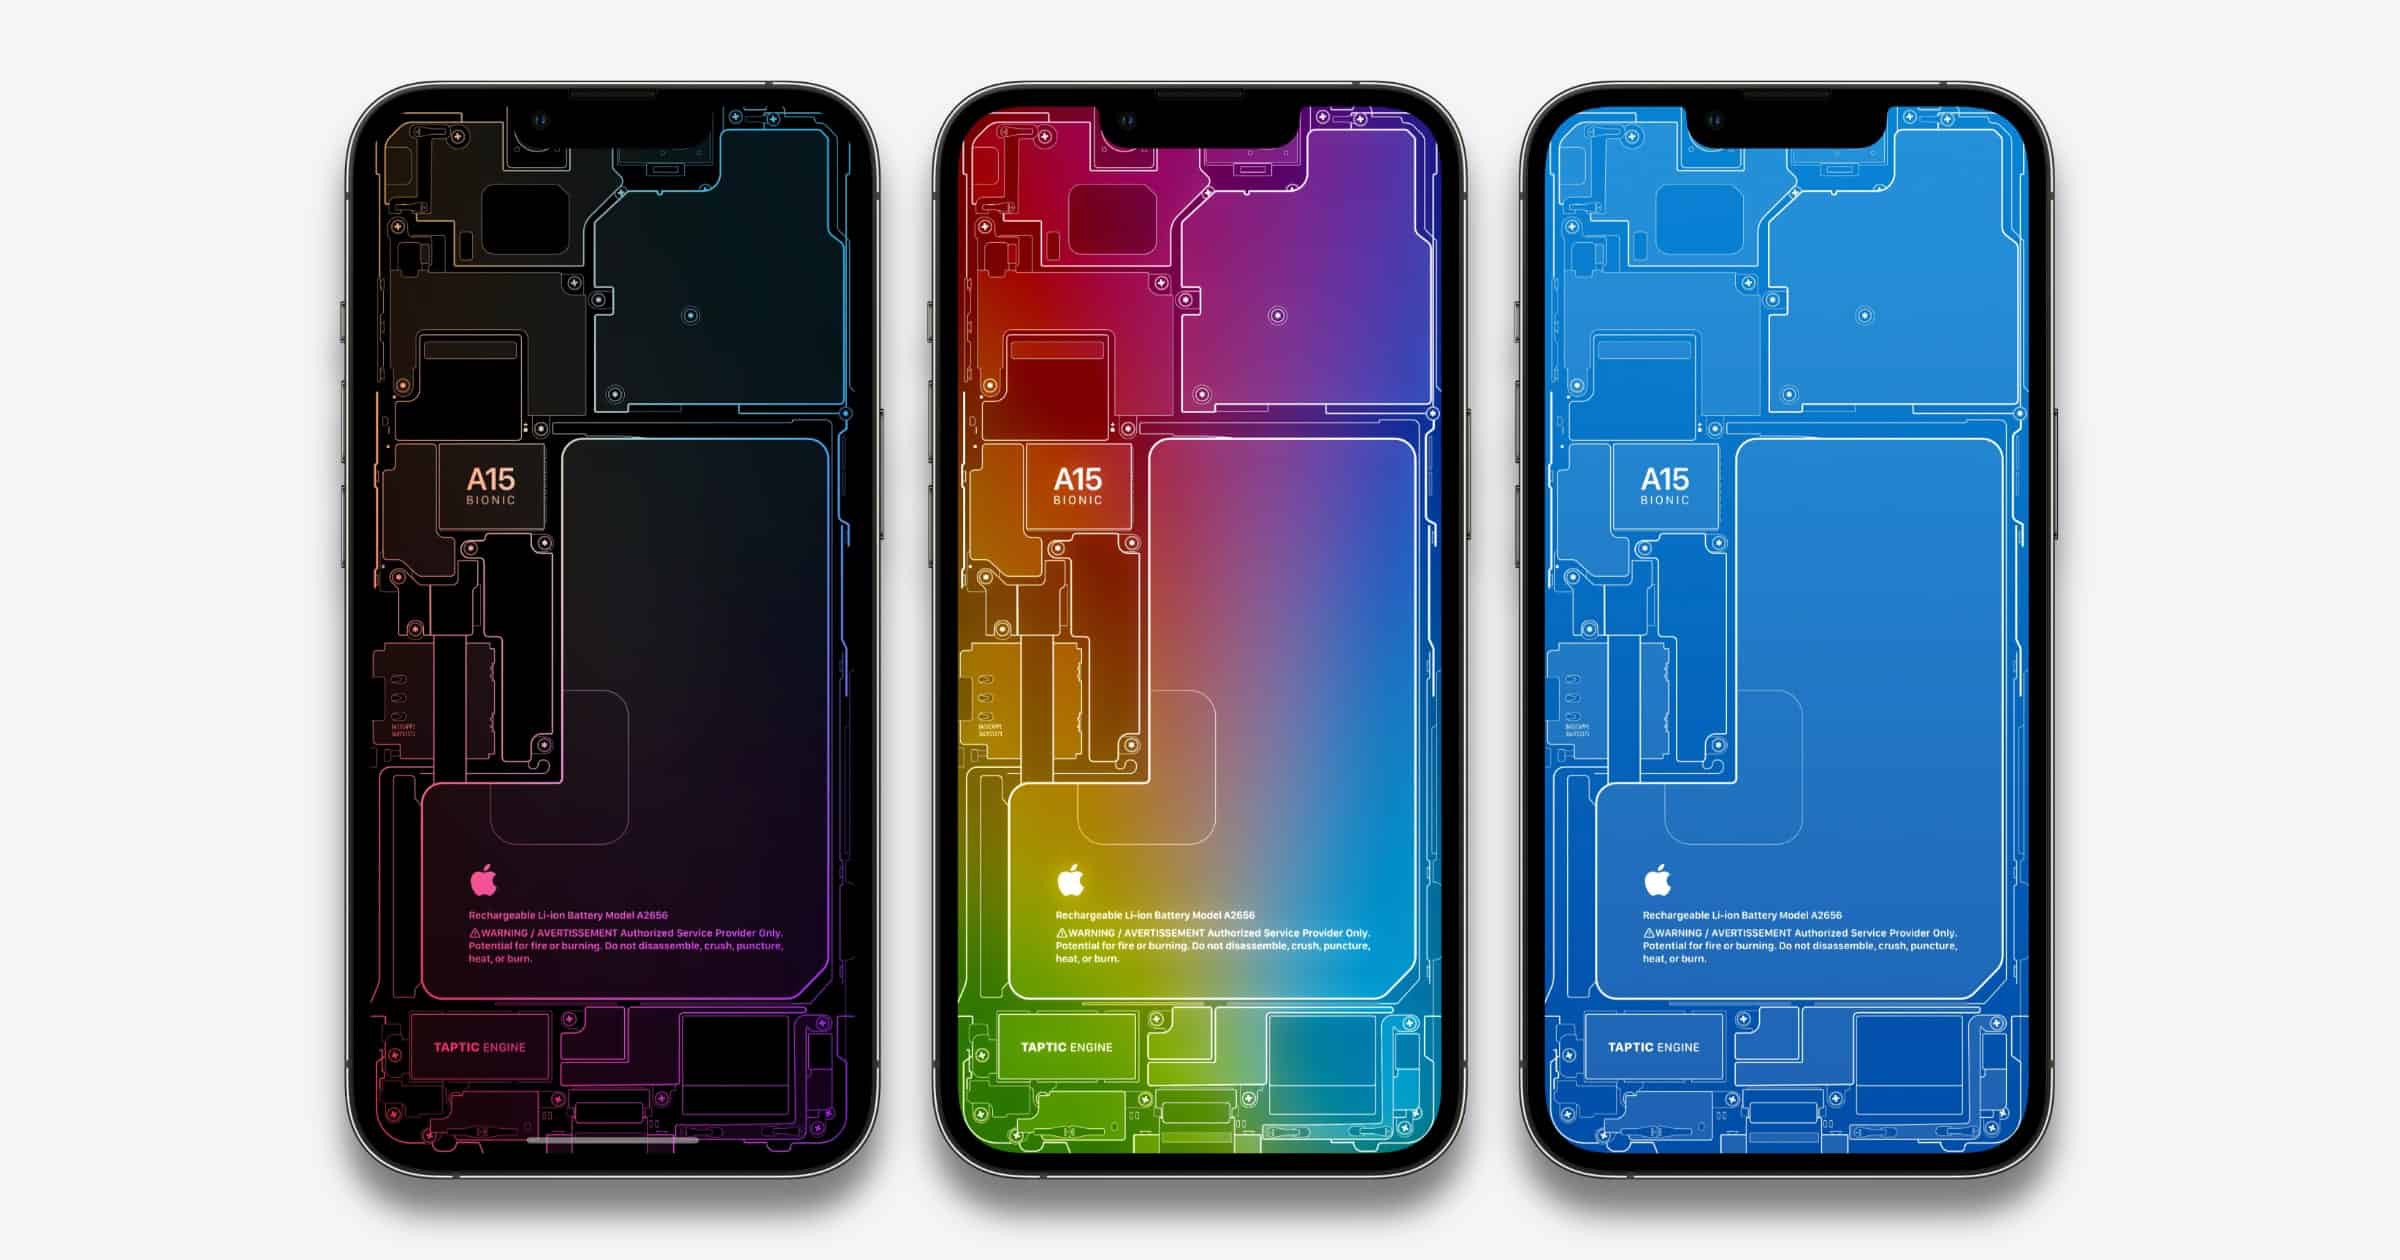 Check Out These Colorful X-Ray Wallpapers for Your iPhone